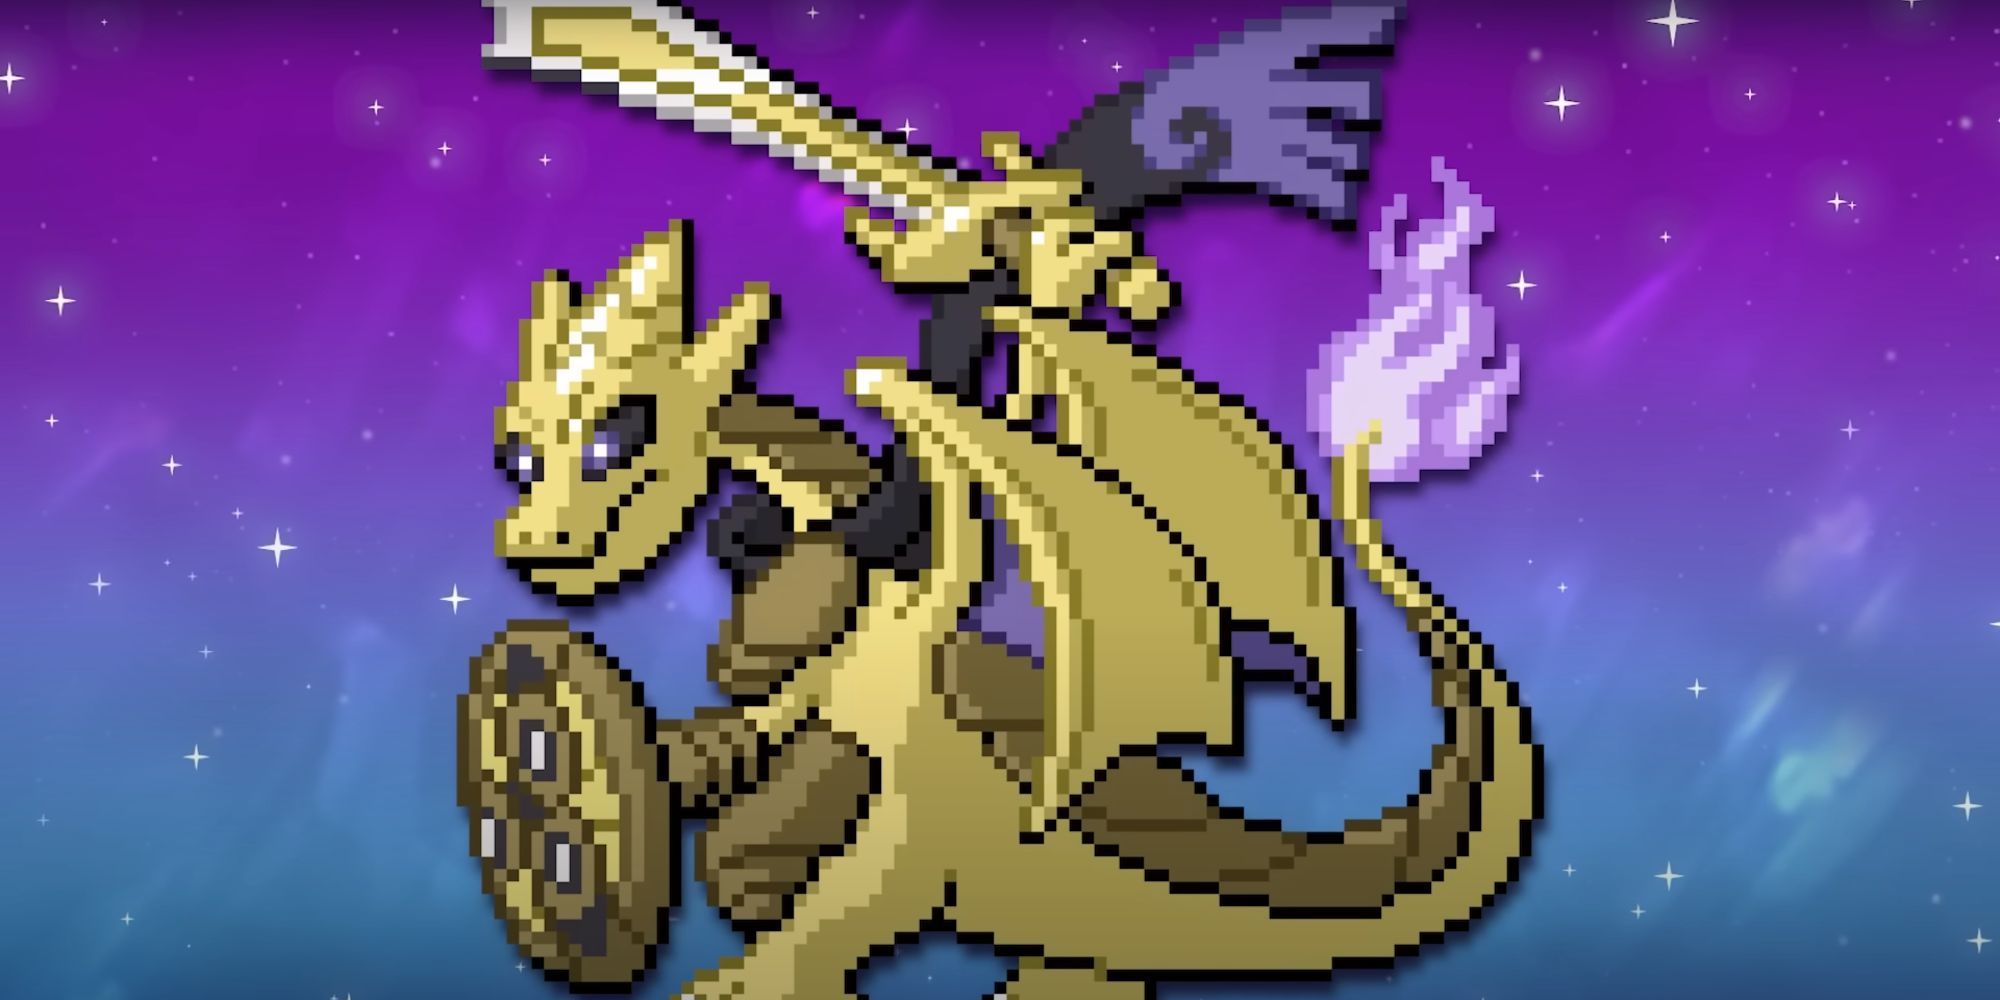 A gold, dragon-like fusion pokemon with a sword, shield, and flaming purple tail.